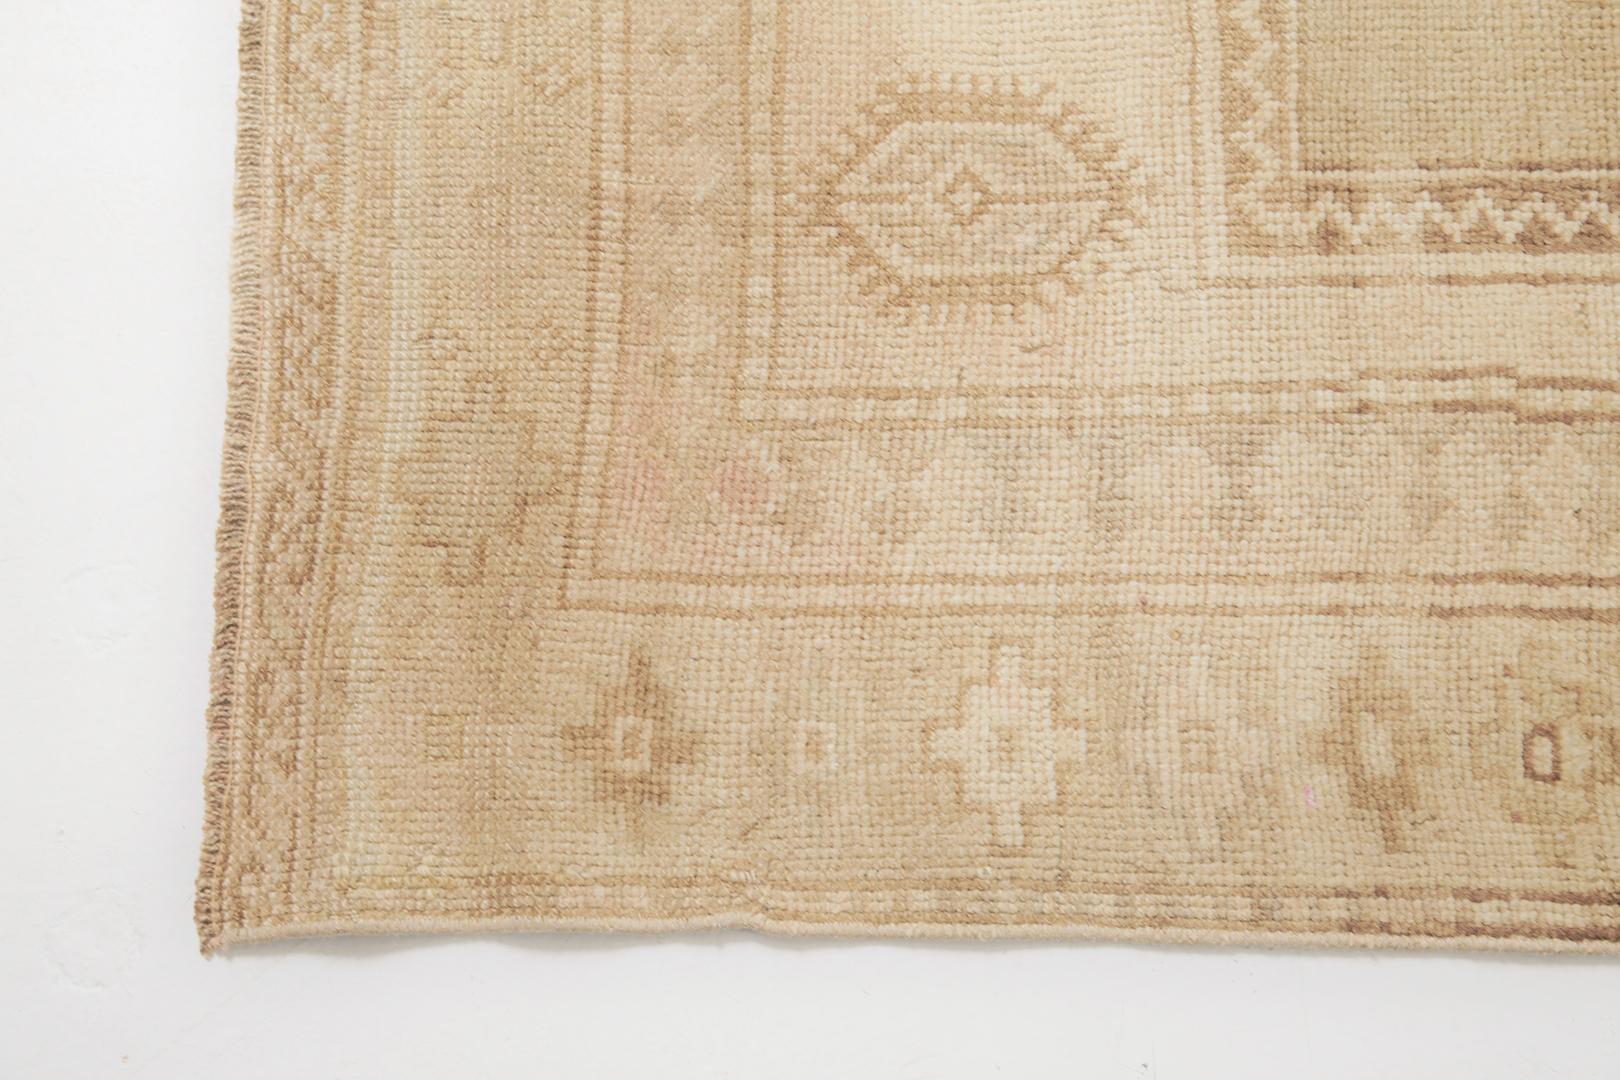 Kars has three majestic geometric elements that make your room very classy and aesthetic. Neutral color gives outstanding and attention to every detail. Turkish Anatolian rugs weave together dyes and colors, motifs, textures, and techniques that are